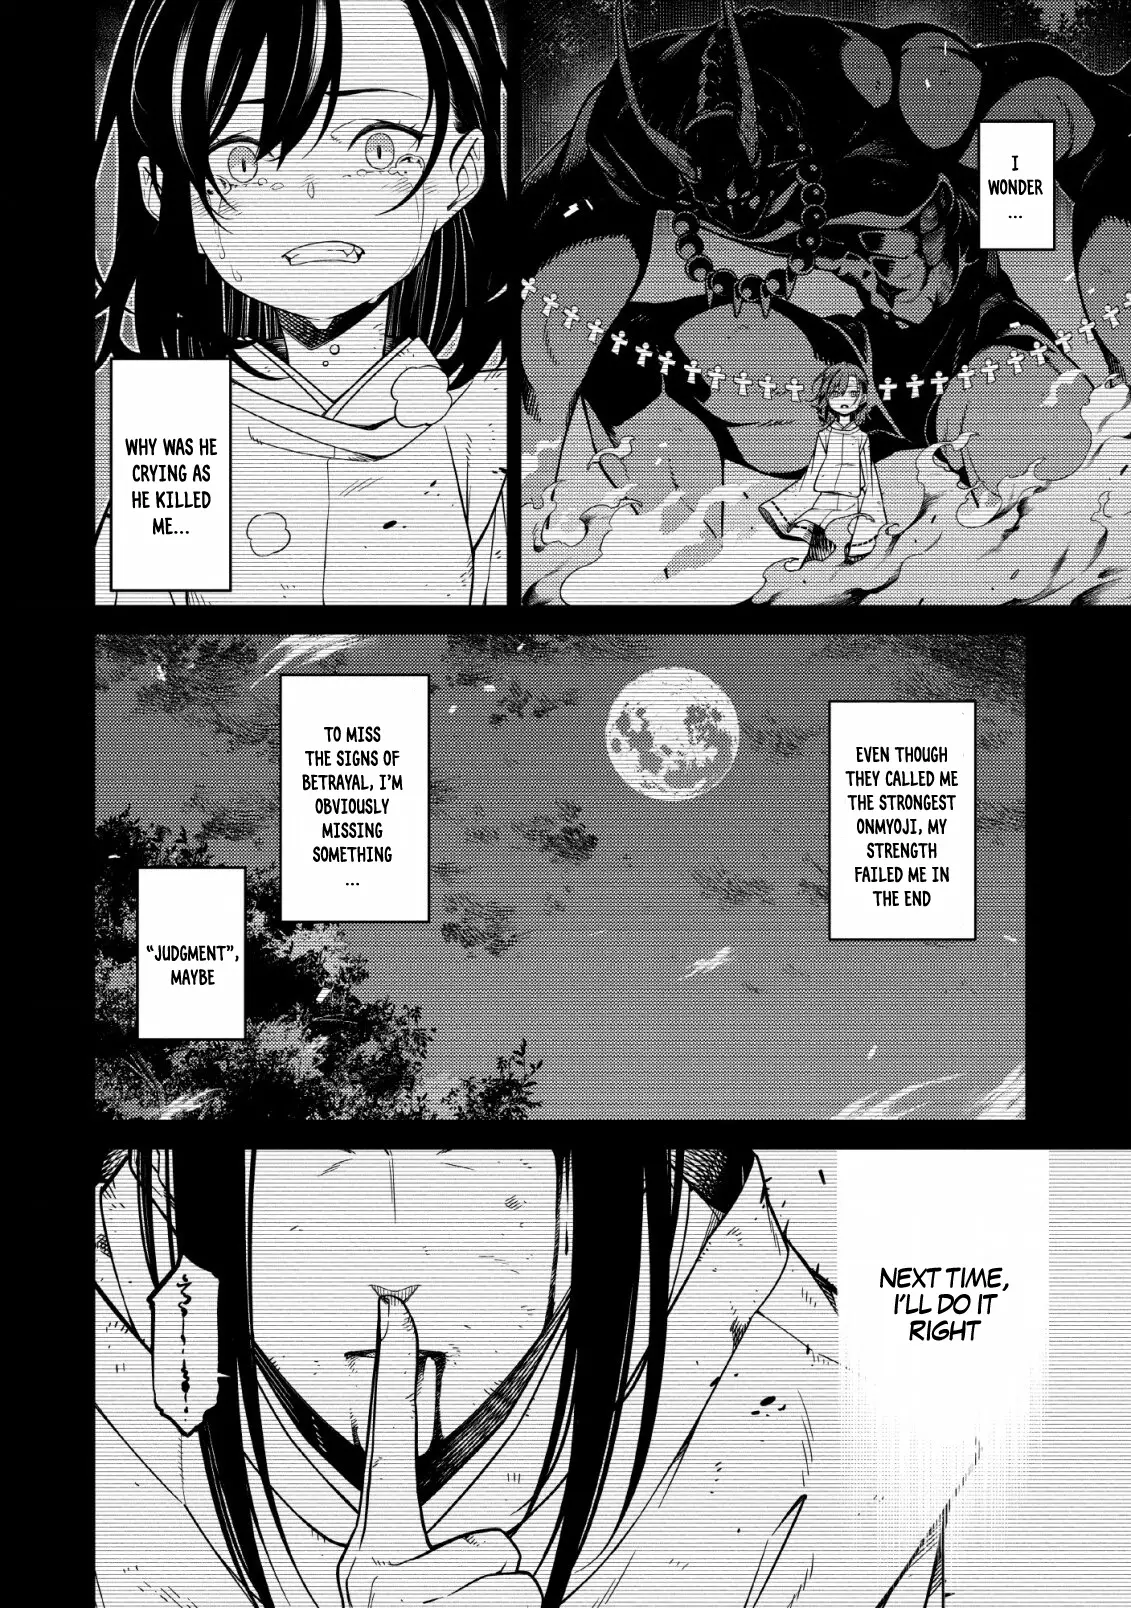 The Reincarnation Of The Strongest Onmyoji ~ These Monsters Are Too Weak Compared To My Youkai~ - 1.1 page 4